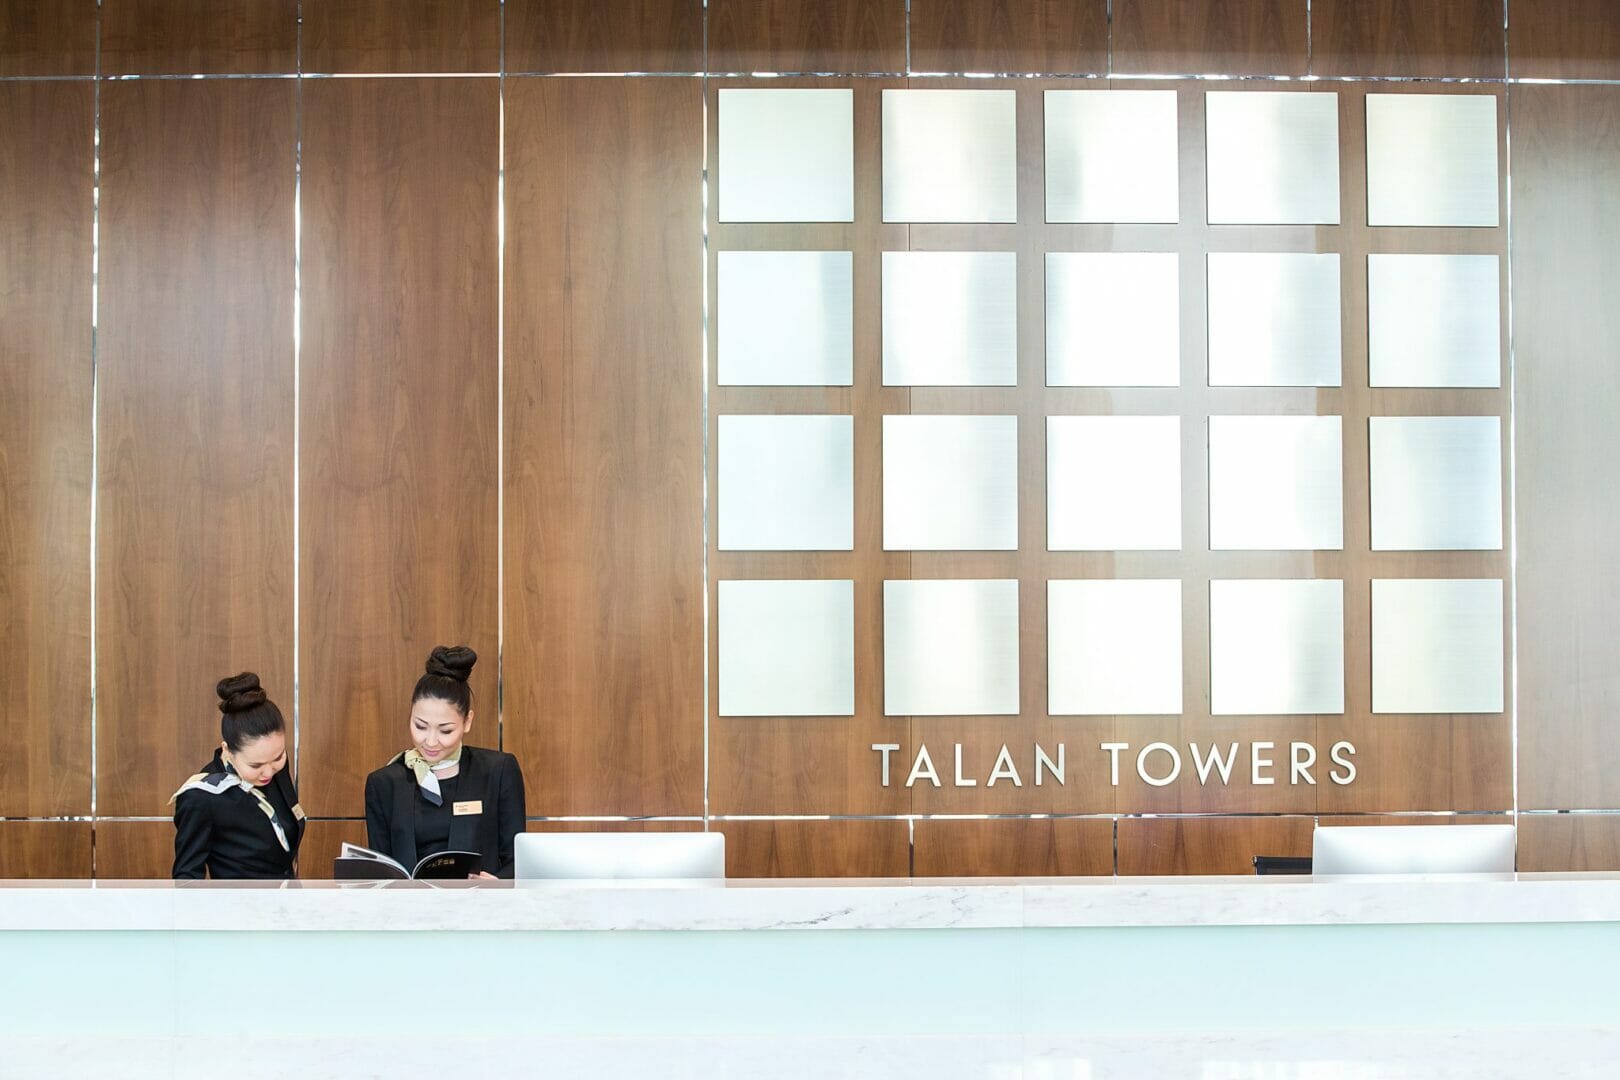 fdcreative Brings the Luxury of Light to Talan Tower @fdcreative1